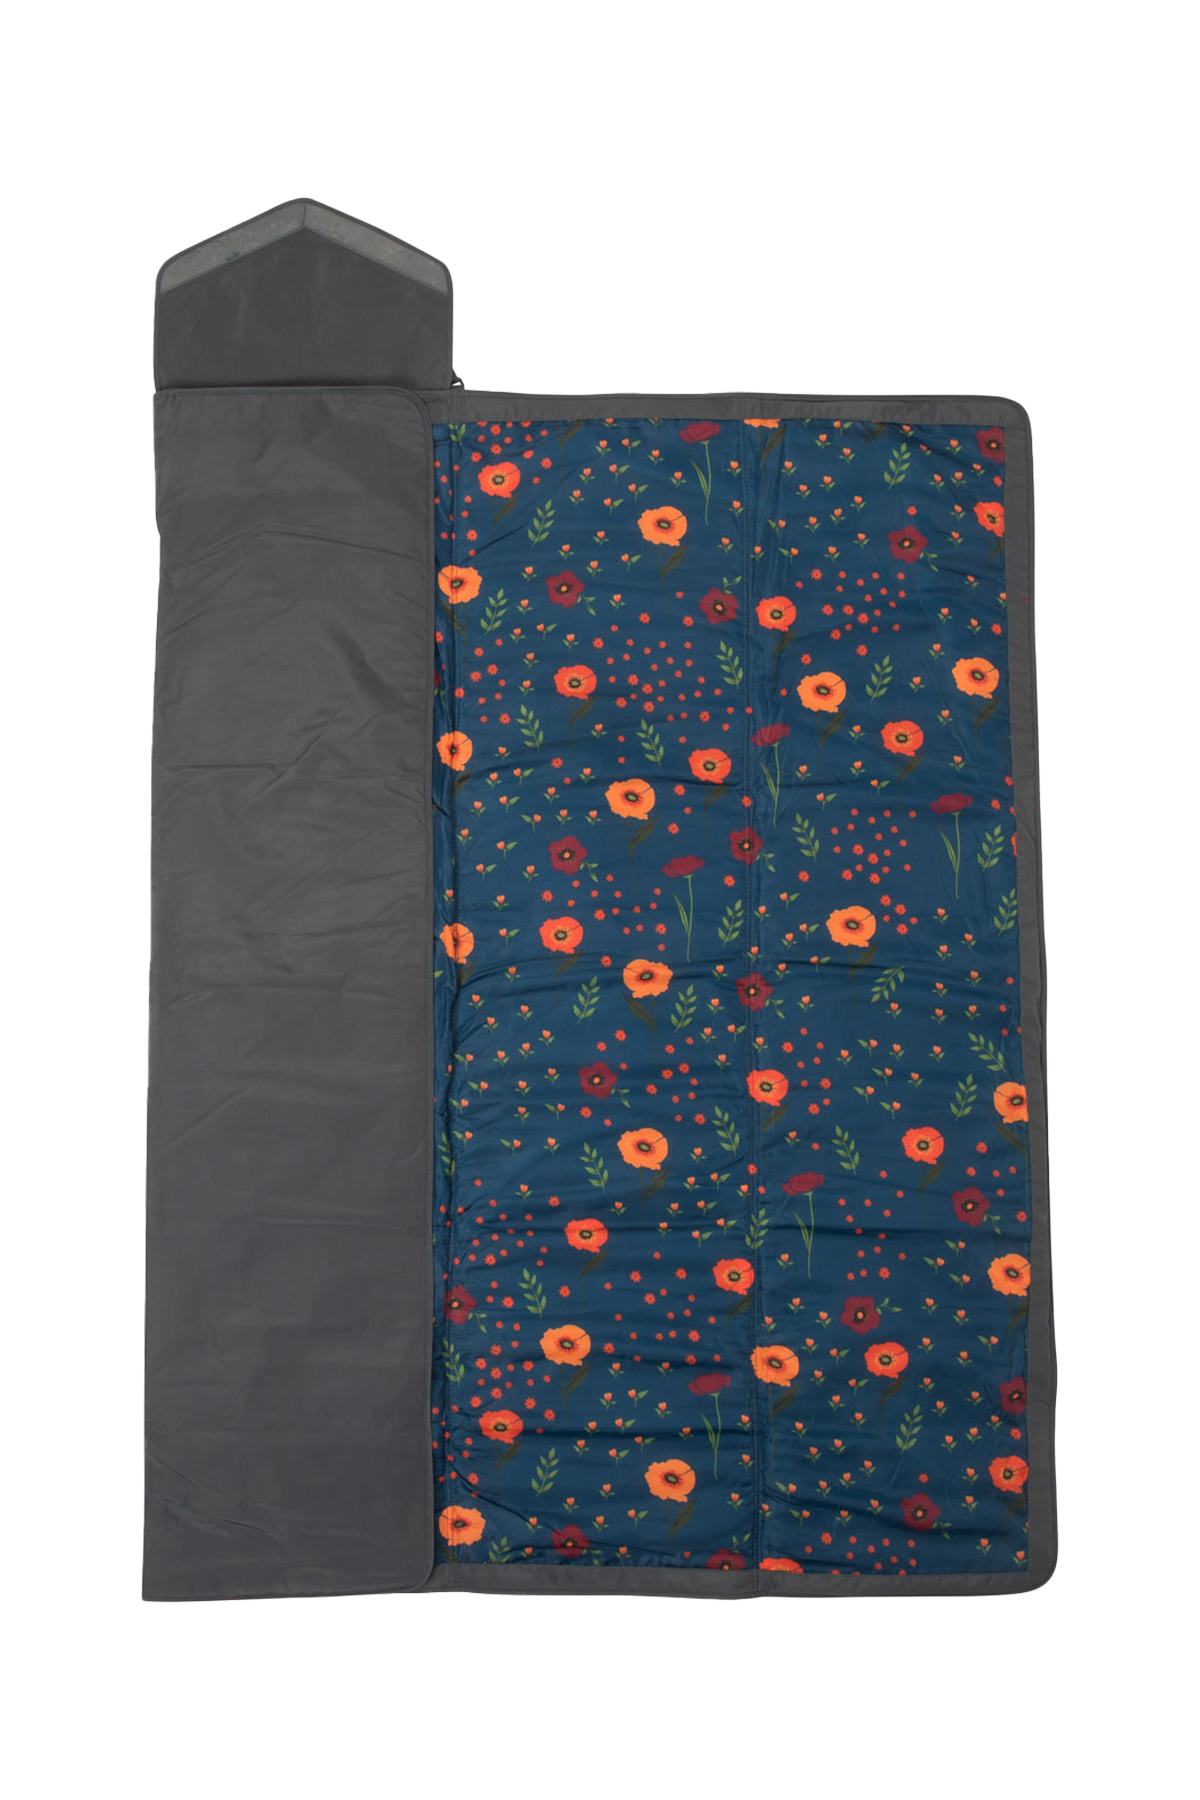 Midnight Poppy Outdoor Blanket from All Good Things